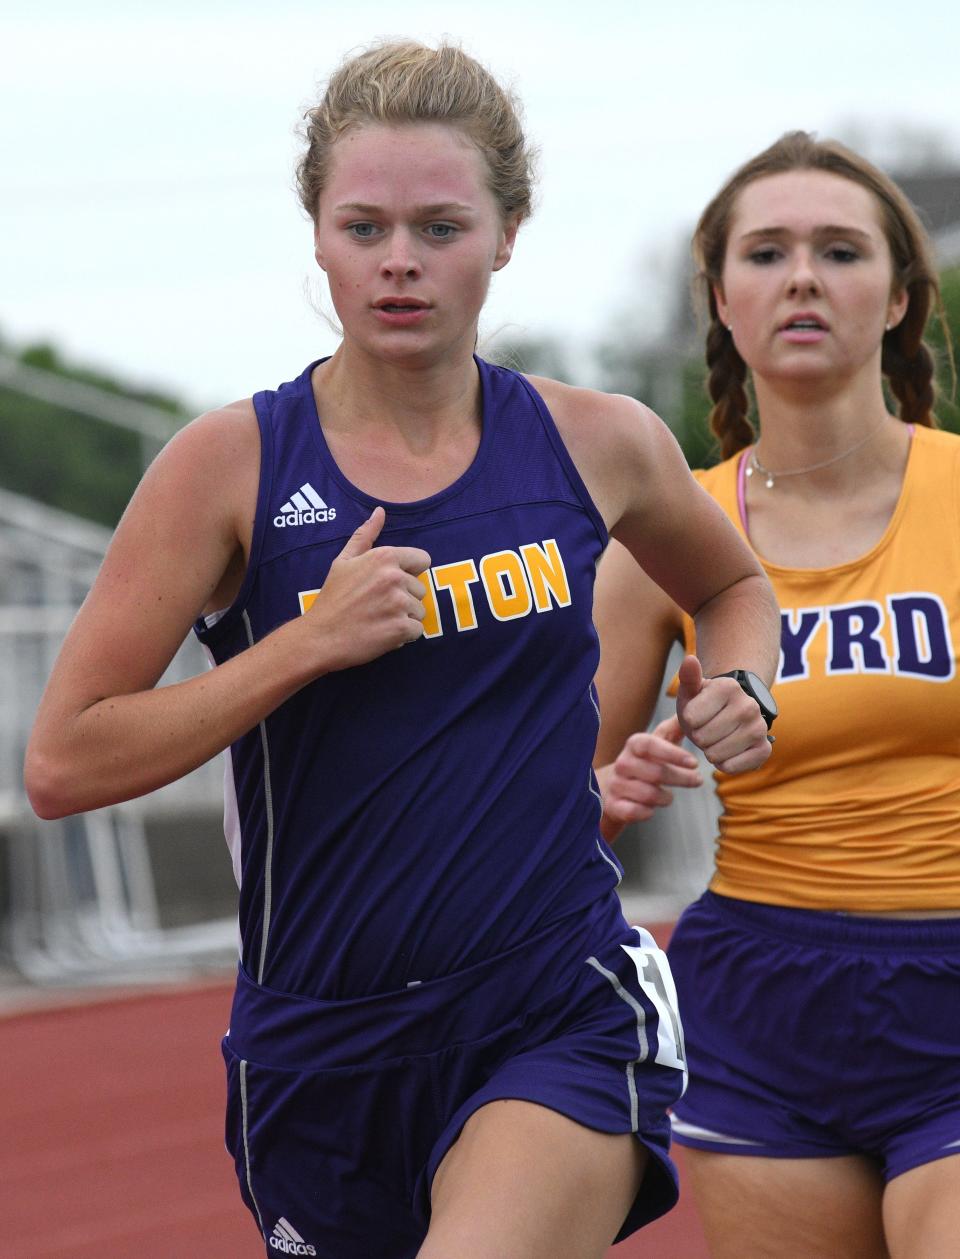 Benton's Isabelle Russell wins the 1600 meter run at the LHSAA District 1-5A track meet held Thursday at Shreveport's Lee Hedges Stadium.